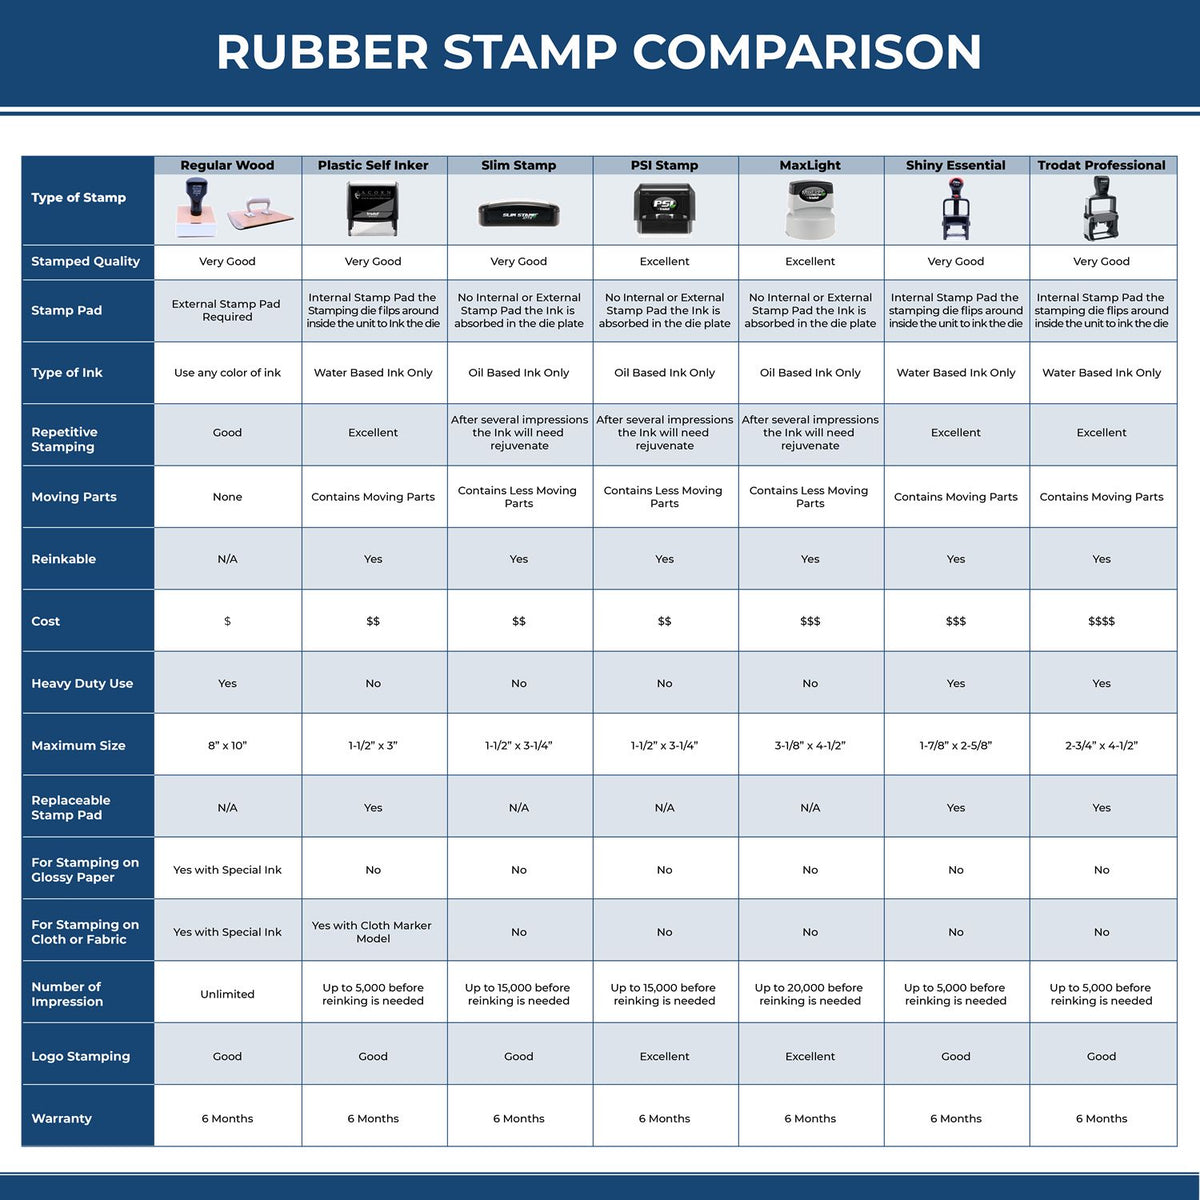 Rush with Rabbit Rubber Stamp 4841R Rubber Stamp Comparison